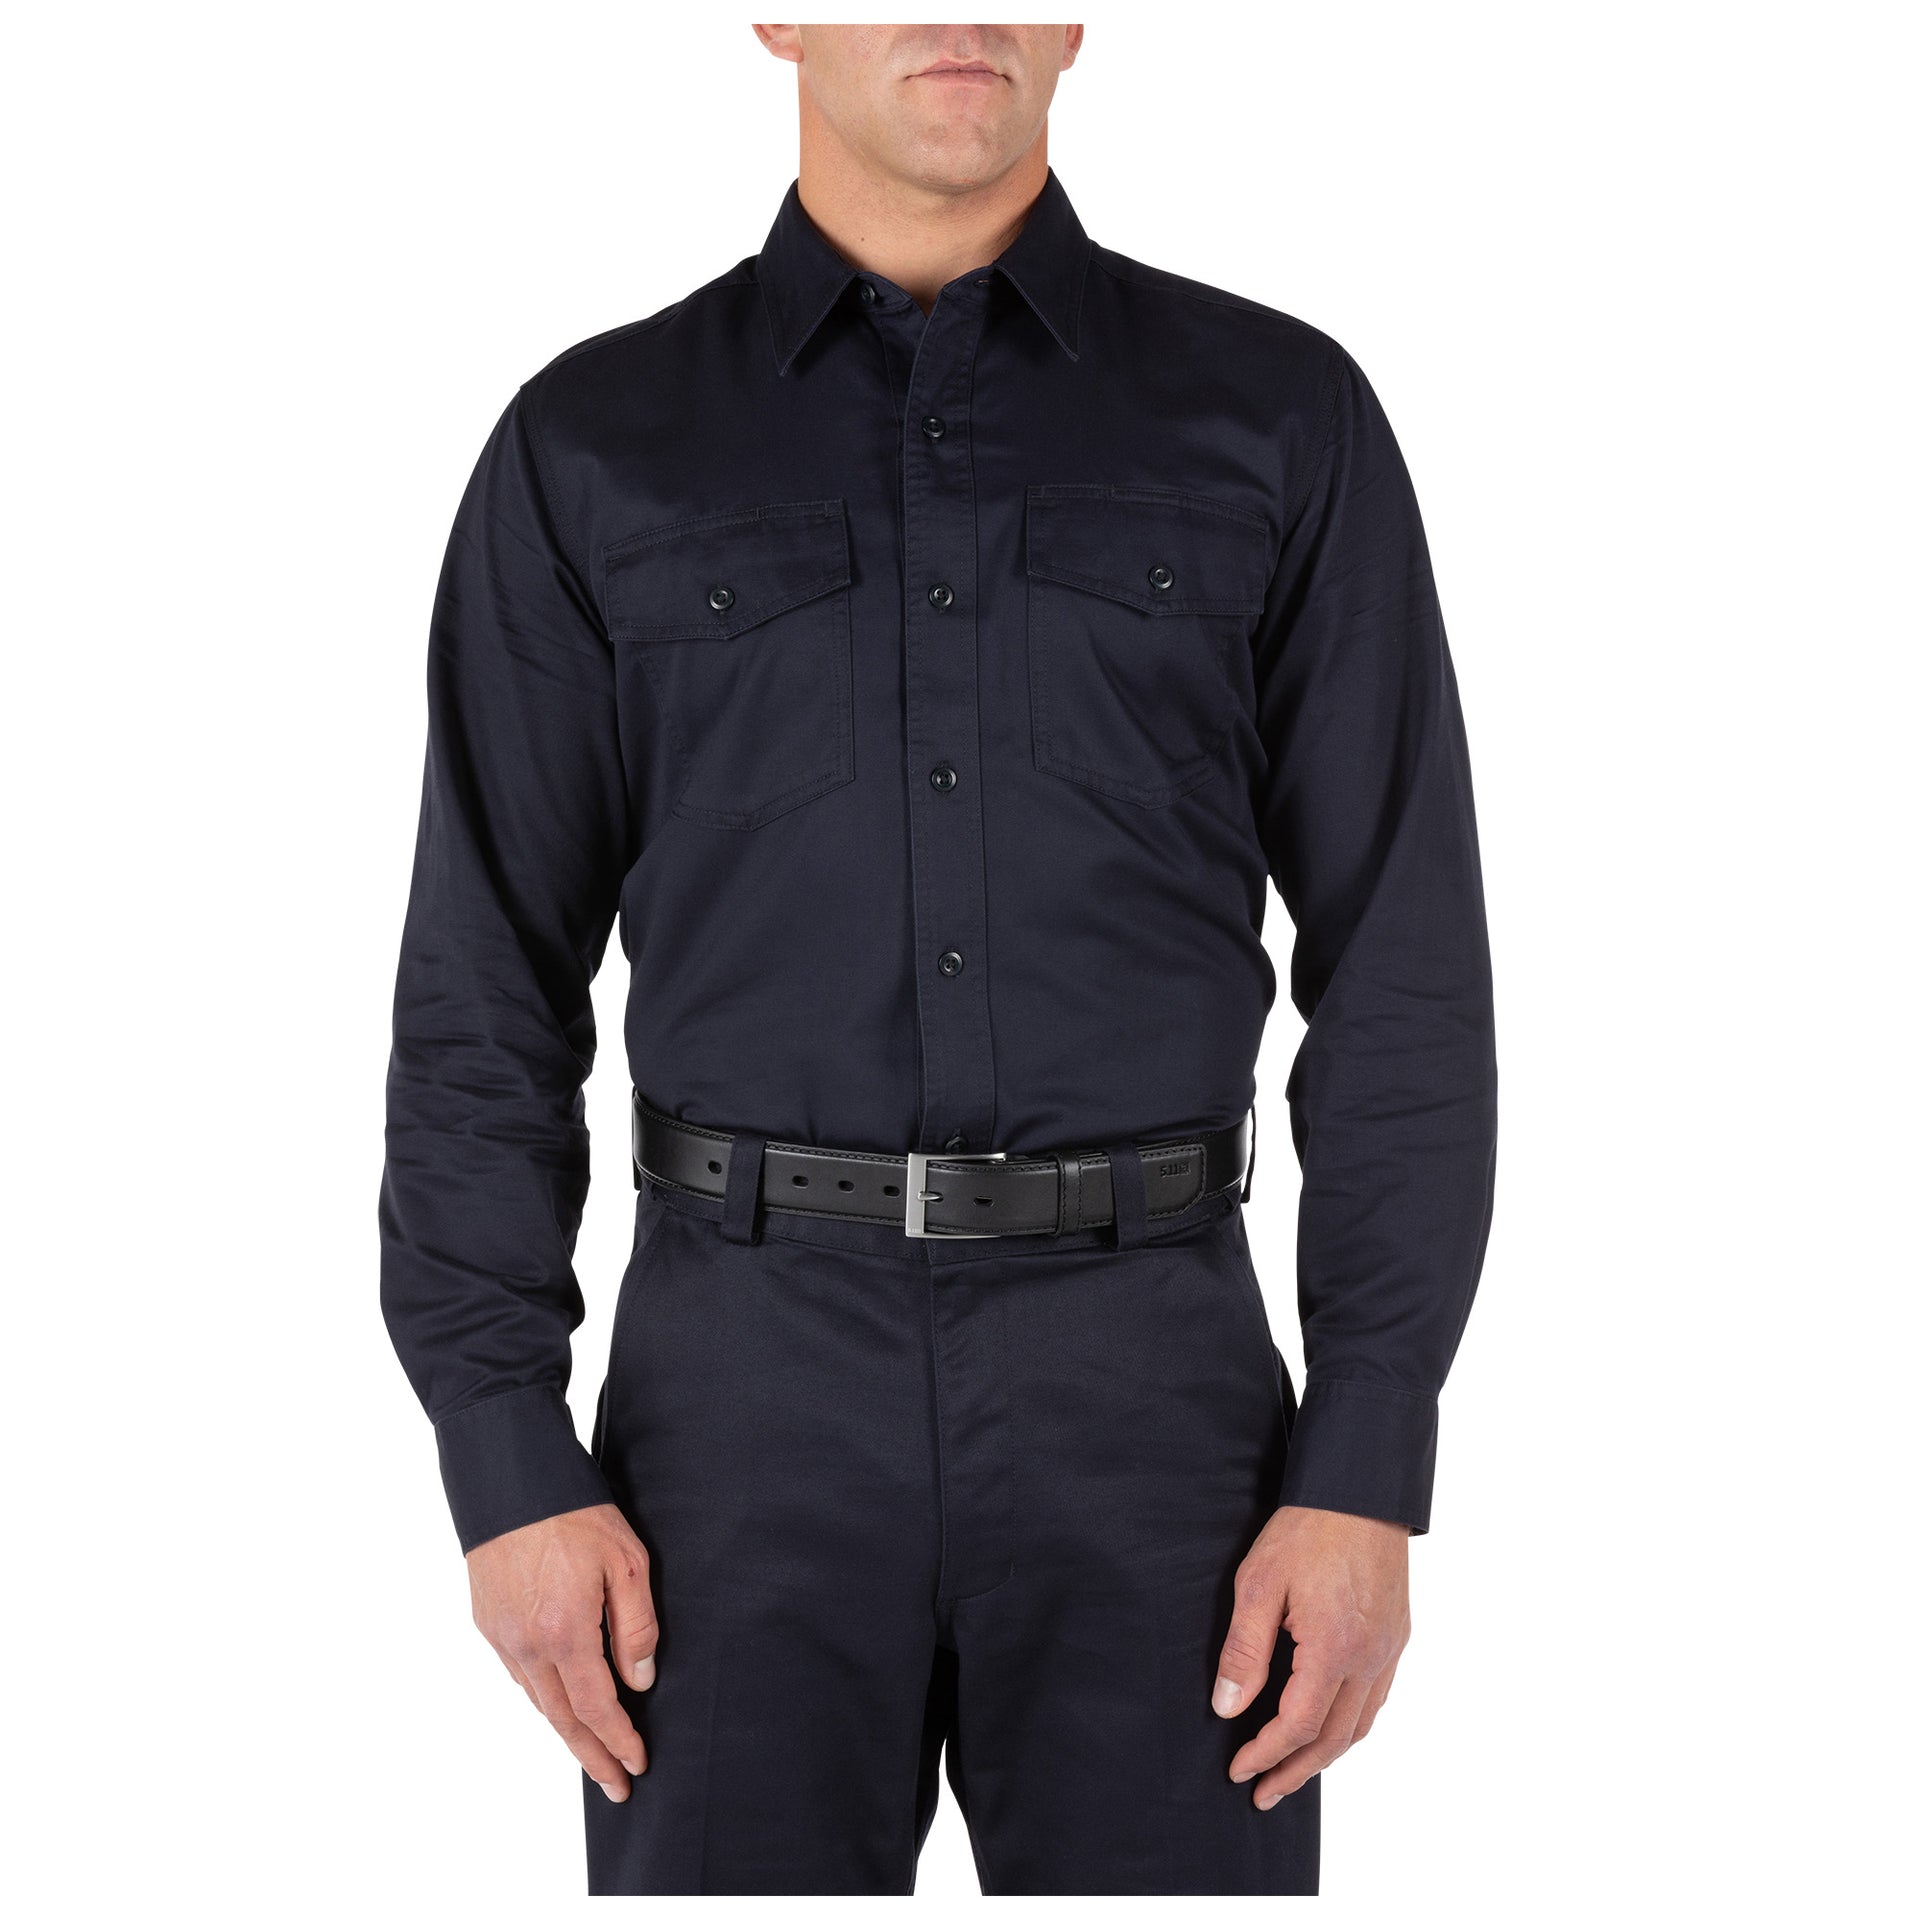 5.11 Tactical Company Long Sleeve Shirt (72515) | The Fire Center | Fuego Fire Center | Firefighter Gear | Ready to answer every call through a busy shift, the Company Shirt backs you with a vital layer of safety (certified to NFPA 1975, 2019 edition) in a high-tech, low maintenance fabric. It’s made with a soft, yet durable cotton twill that’s wrinkle-resistant and stitched with protective Firefly™ thread. 